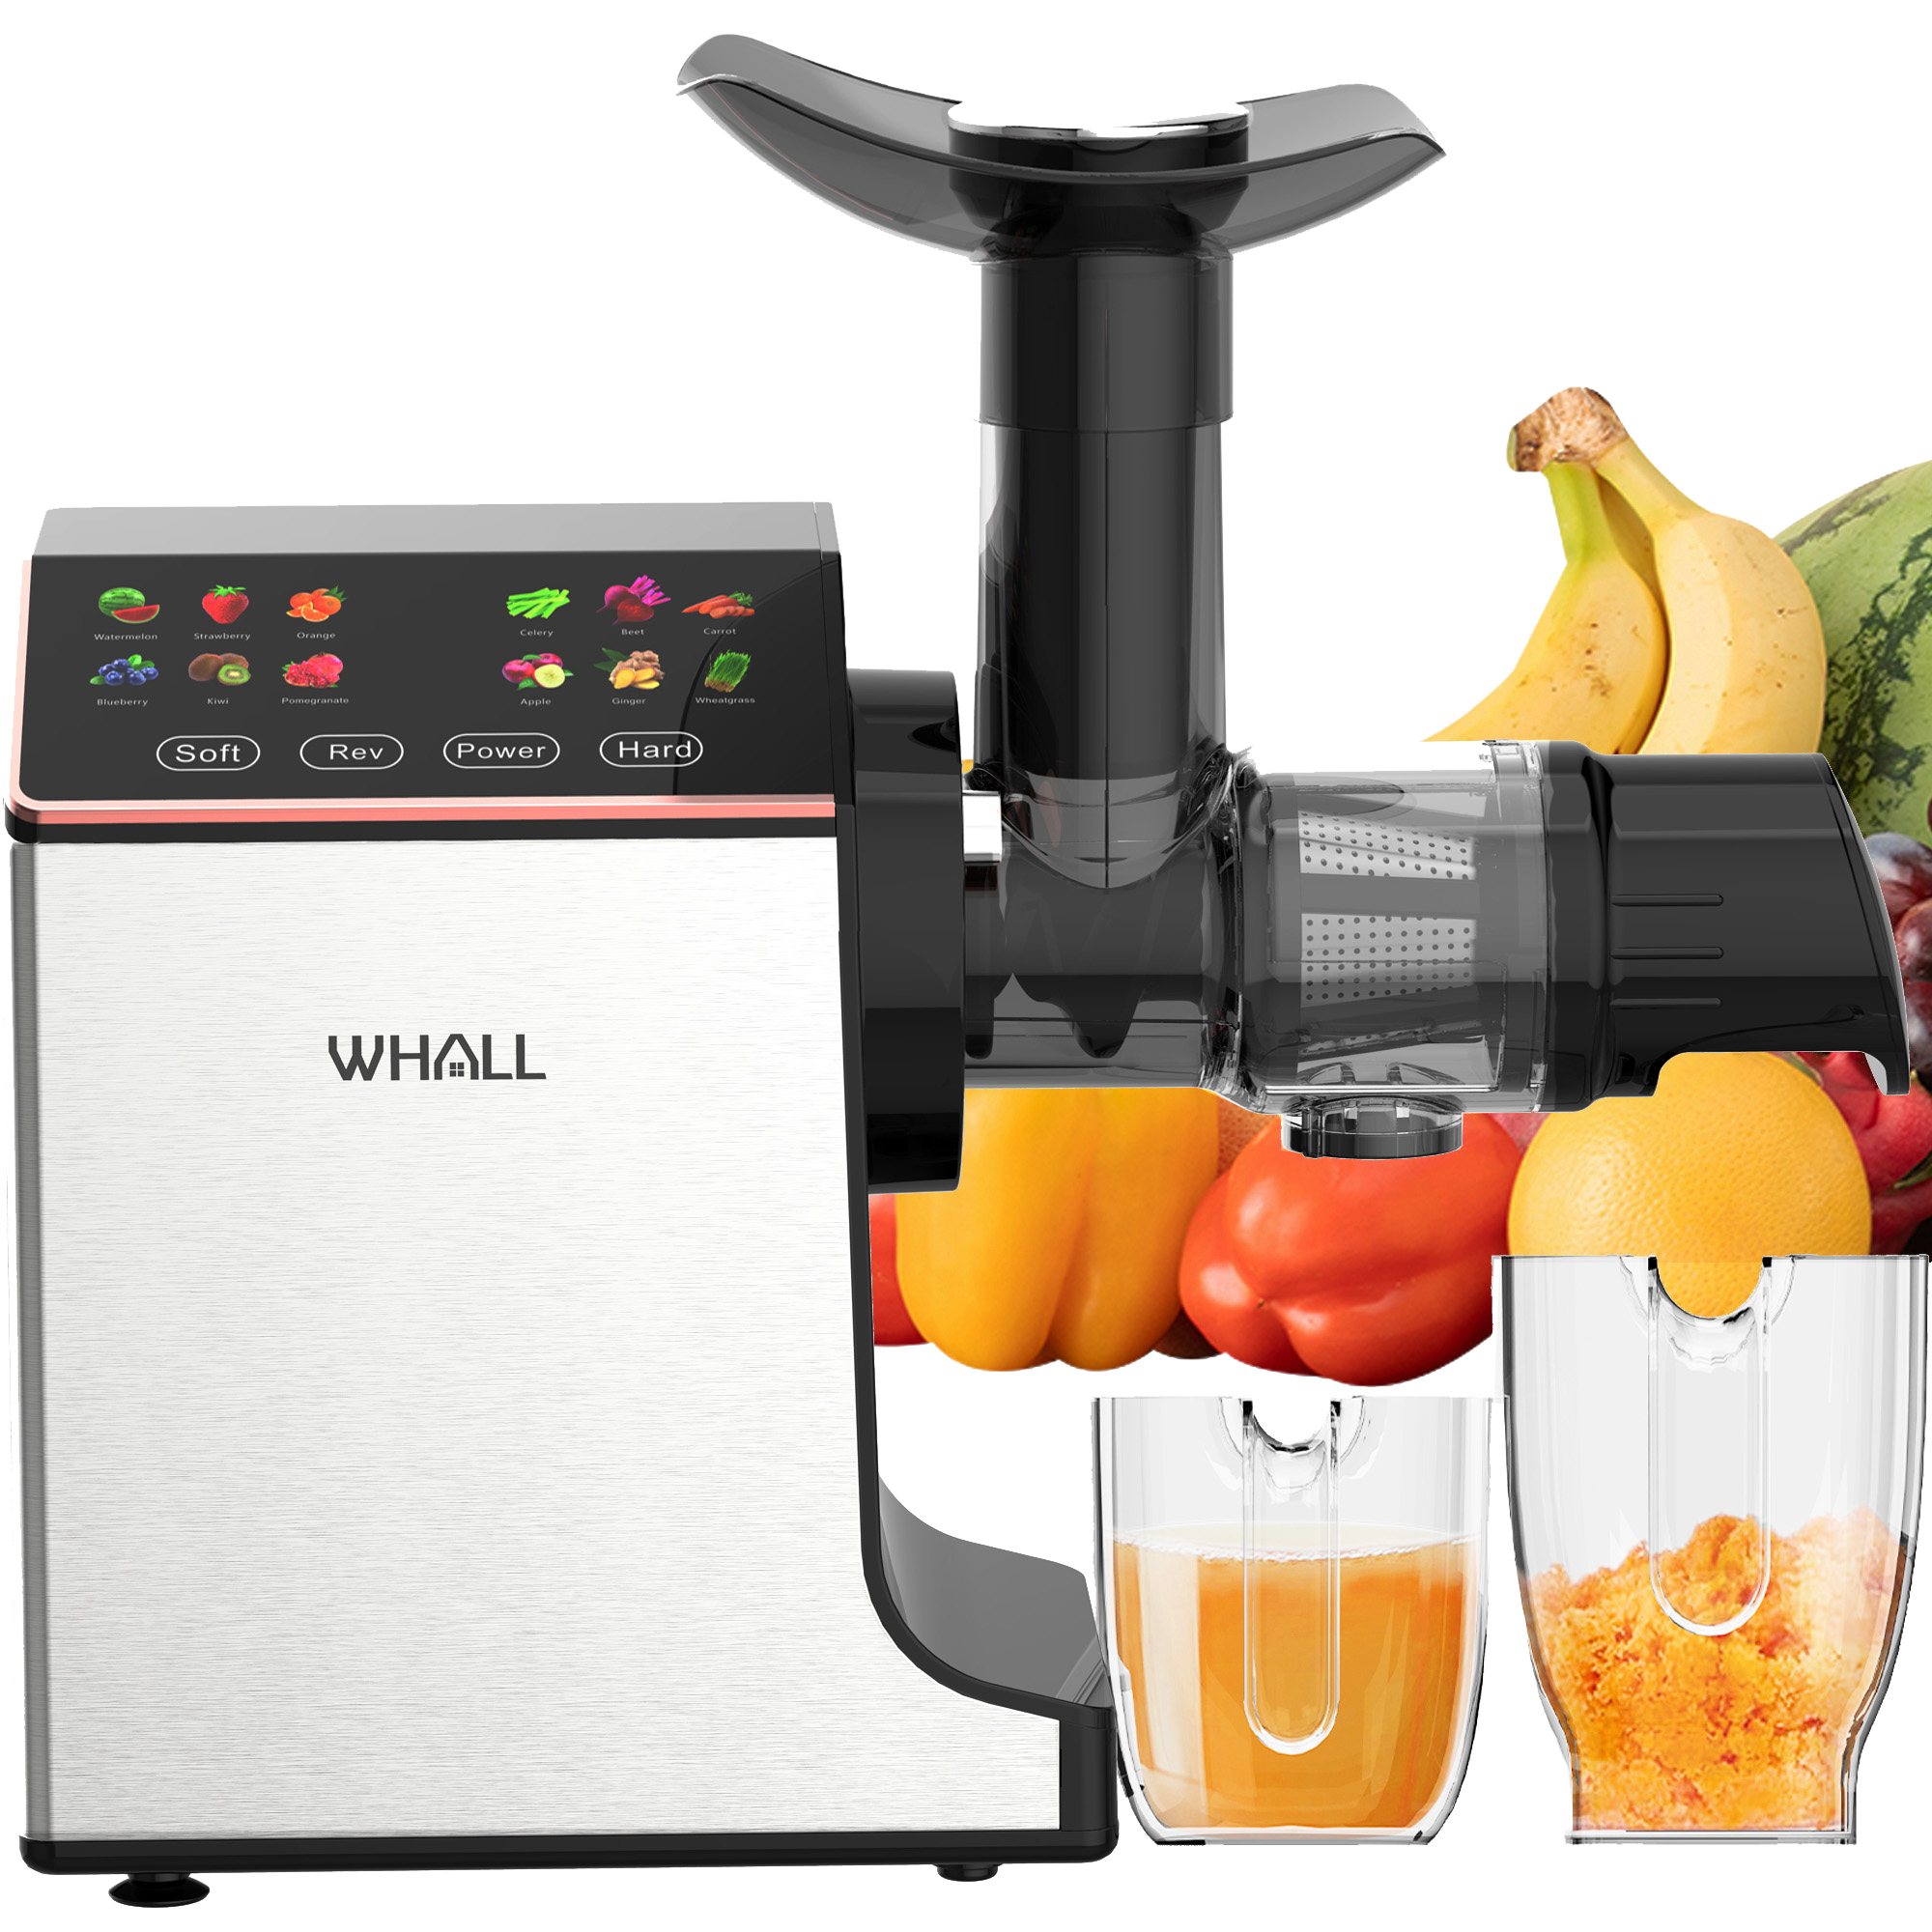 WHALL® Slow Masticating Juicer - Cold Press Juicer Machine with Touchscreen, Reverse Function, Soft & Hard Models, Quiet Motor - image 1 of 8